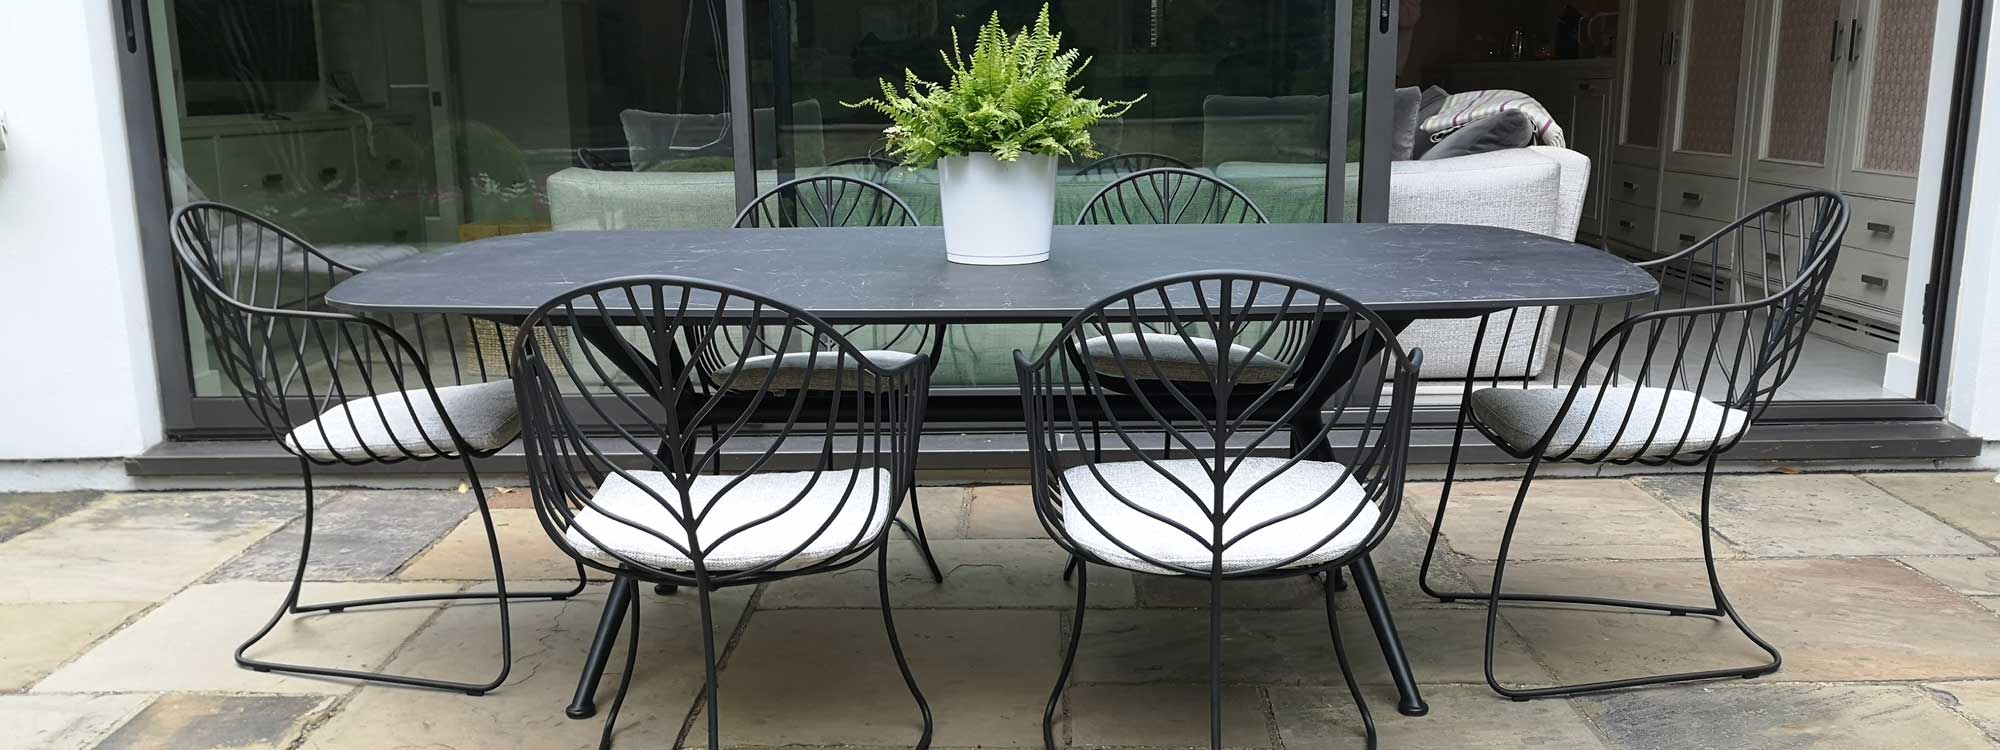 Exes LUXURY GARDEN TABLE - MODERN Outdoor Dining Tables In HIGH QUALITY Garden Furniture MATERIALS By Royal Botania LUXURY Exterior FURNITURE - London Installation of Folia Garden Chair & Exes Garden Table. Looking For Modern Garden Dining Set ? Wide Range of Luxury Outdoor Furniture, Modern Garden Dining Tables & Modern Garden Chairs In All-Weather Materials.